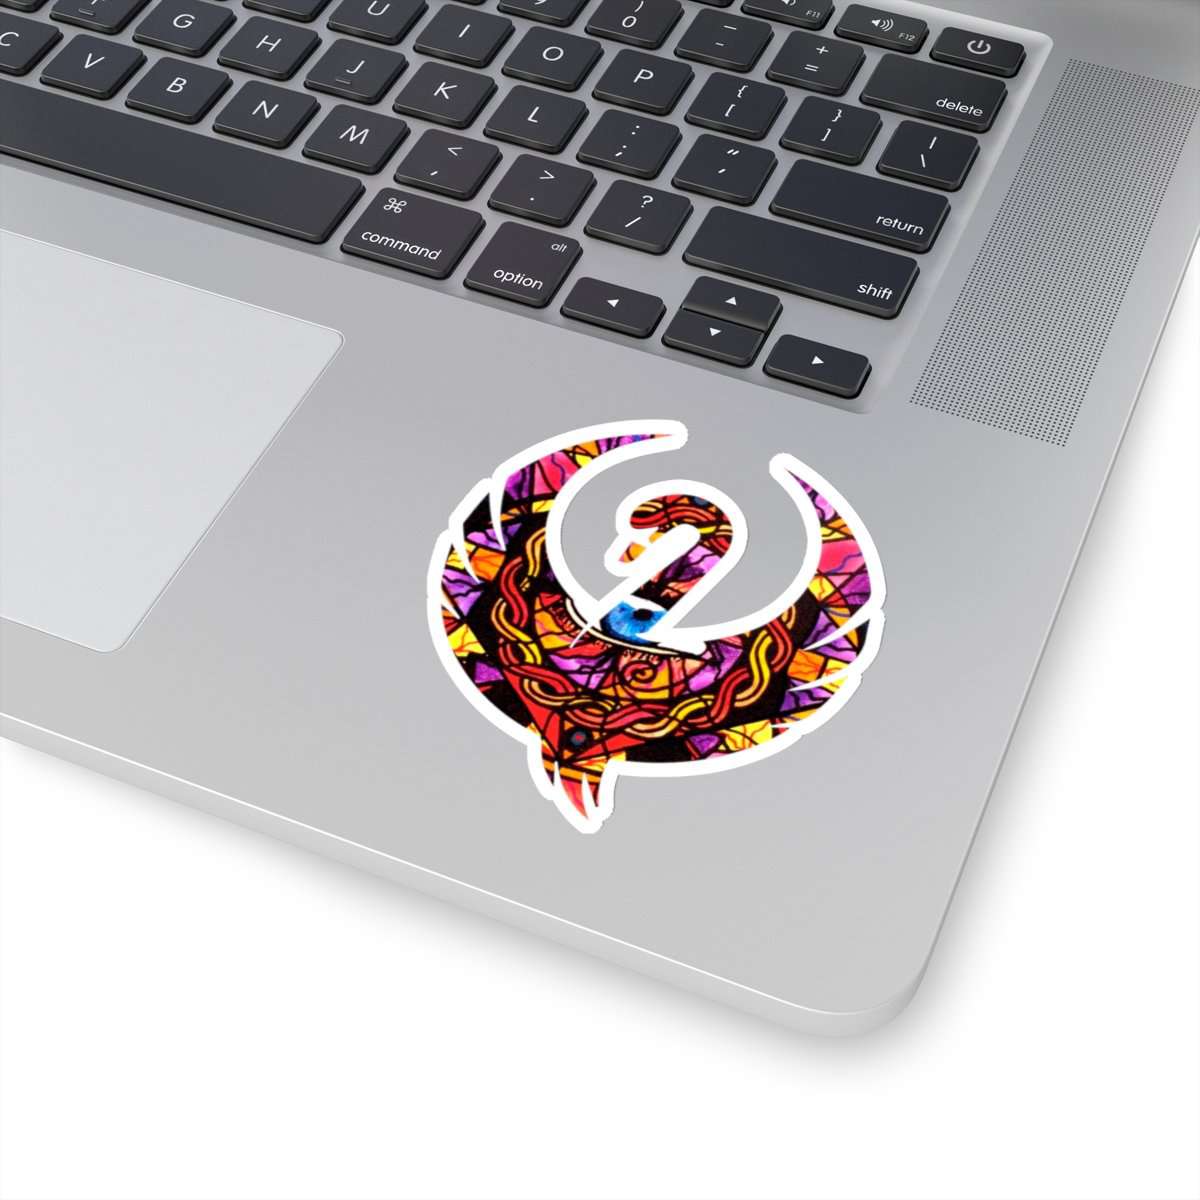 purchase-confident-self-expression-swan-stickers-hot-on-sale_7.jpg